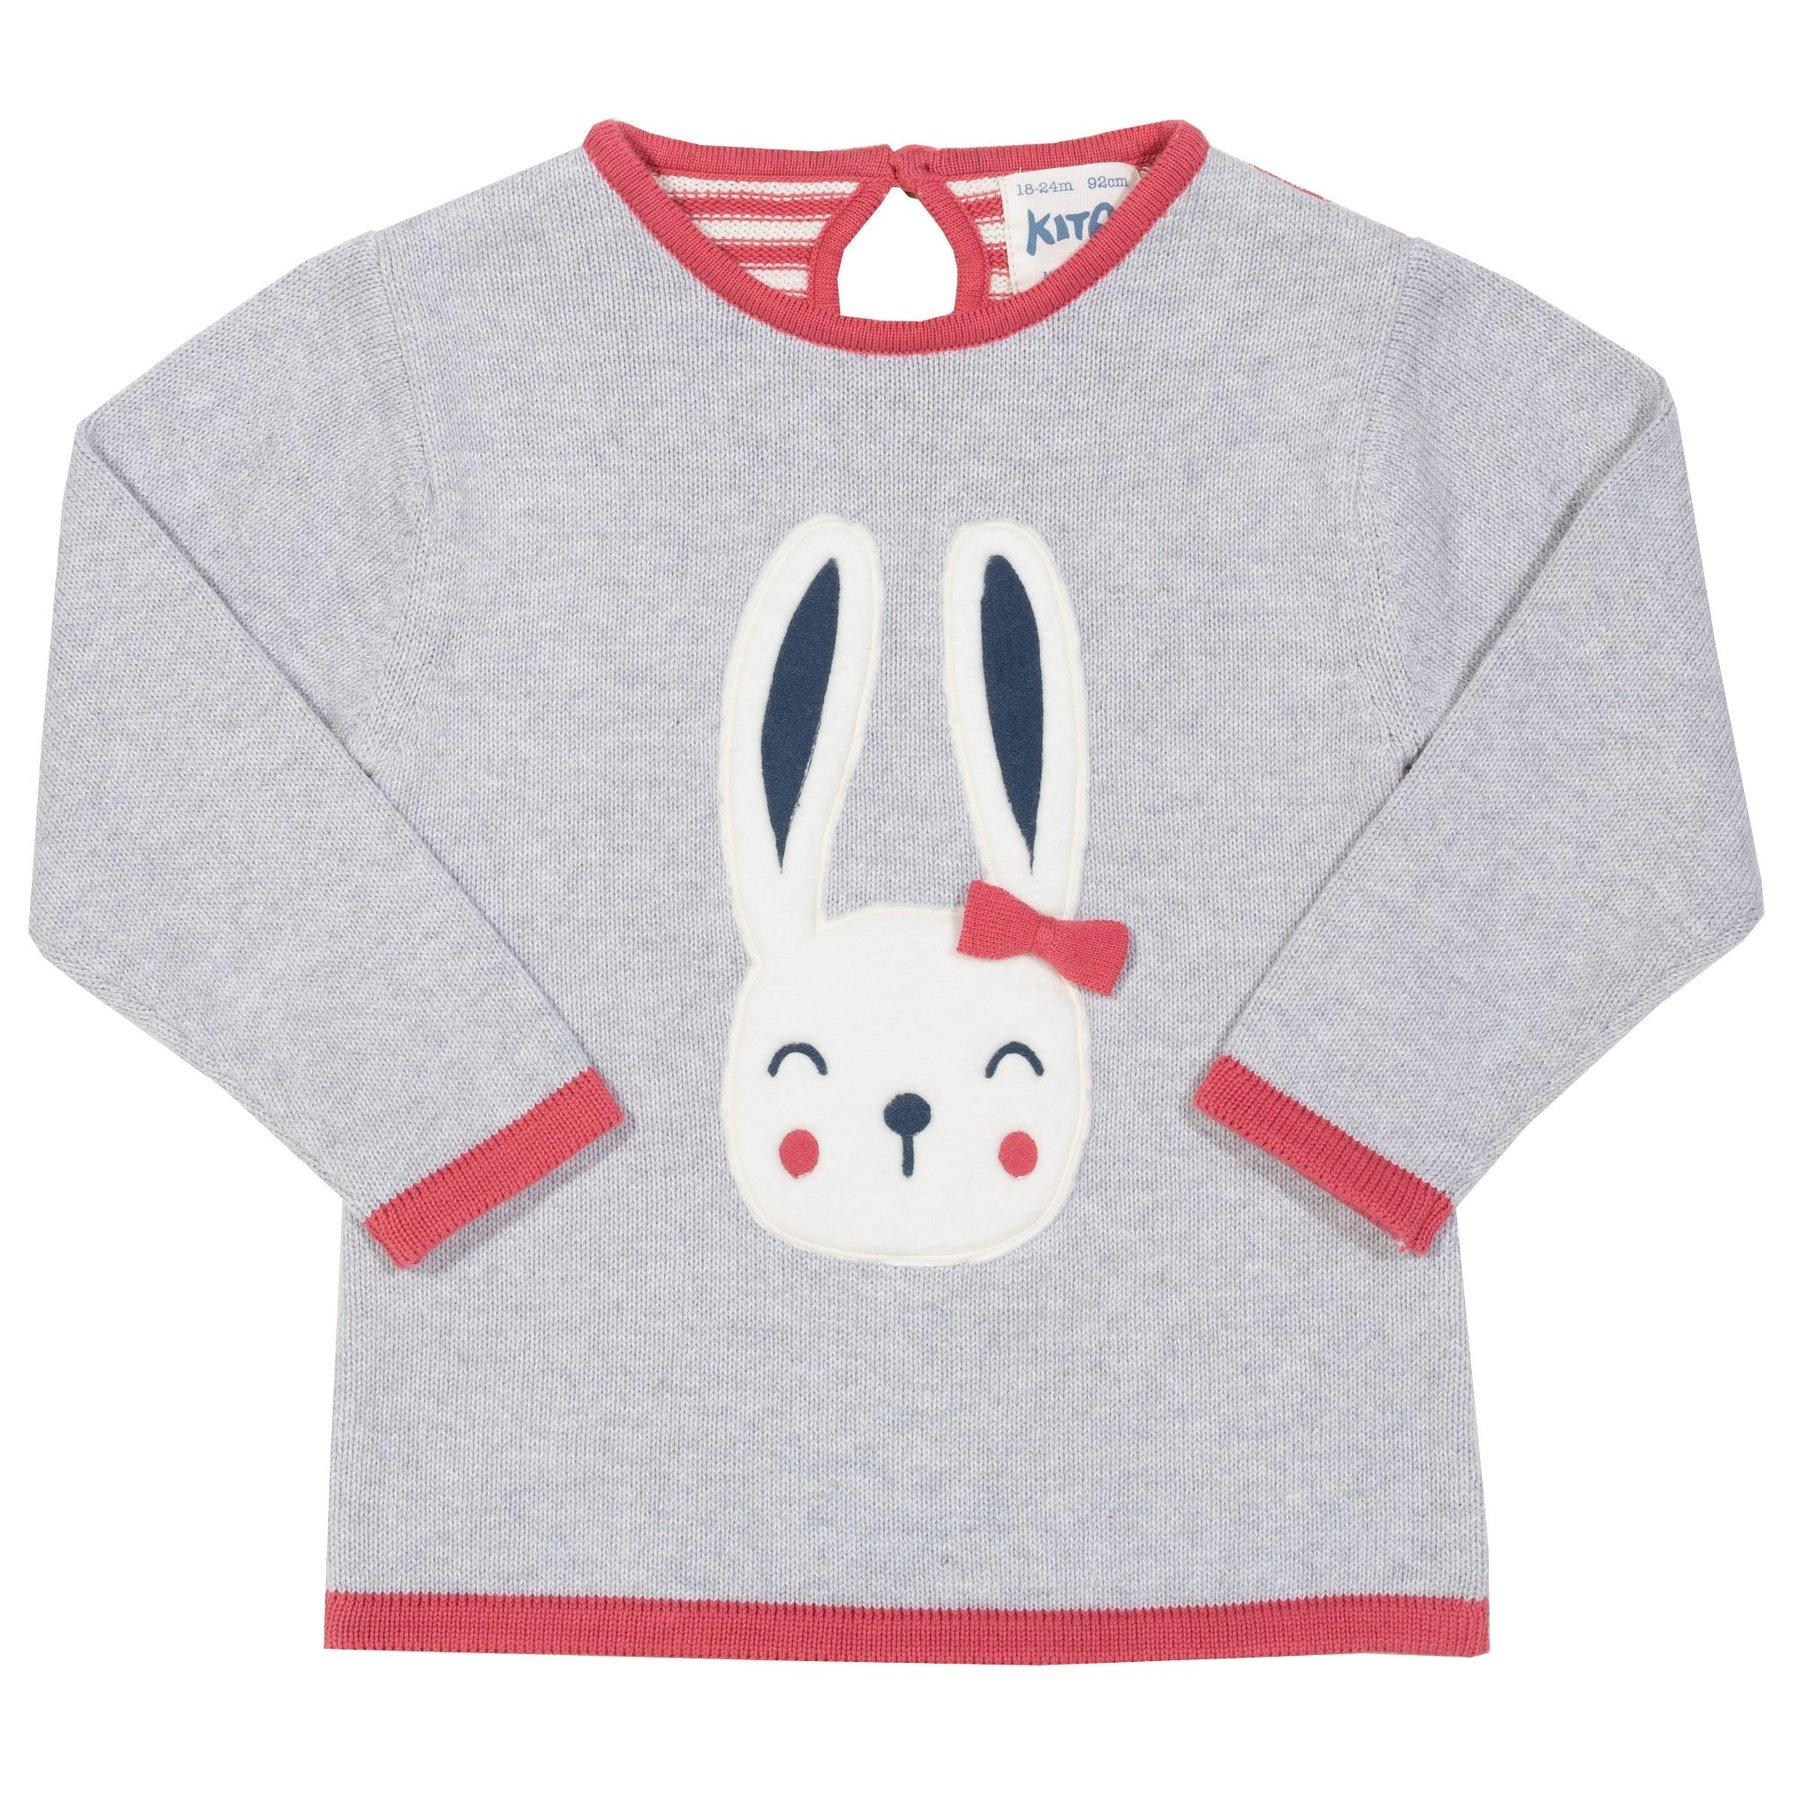 Kite Clothing Happy Hare Jumper front